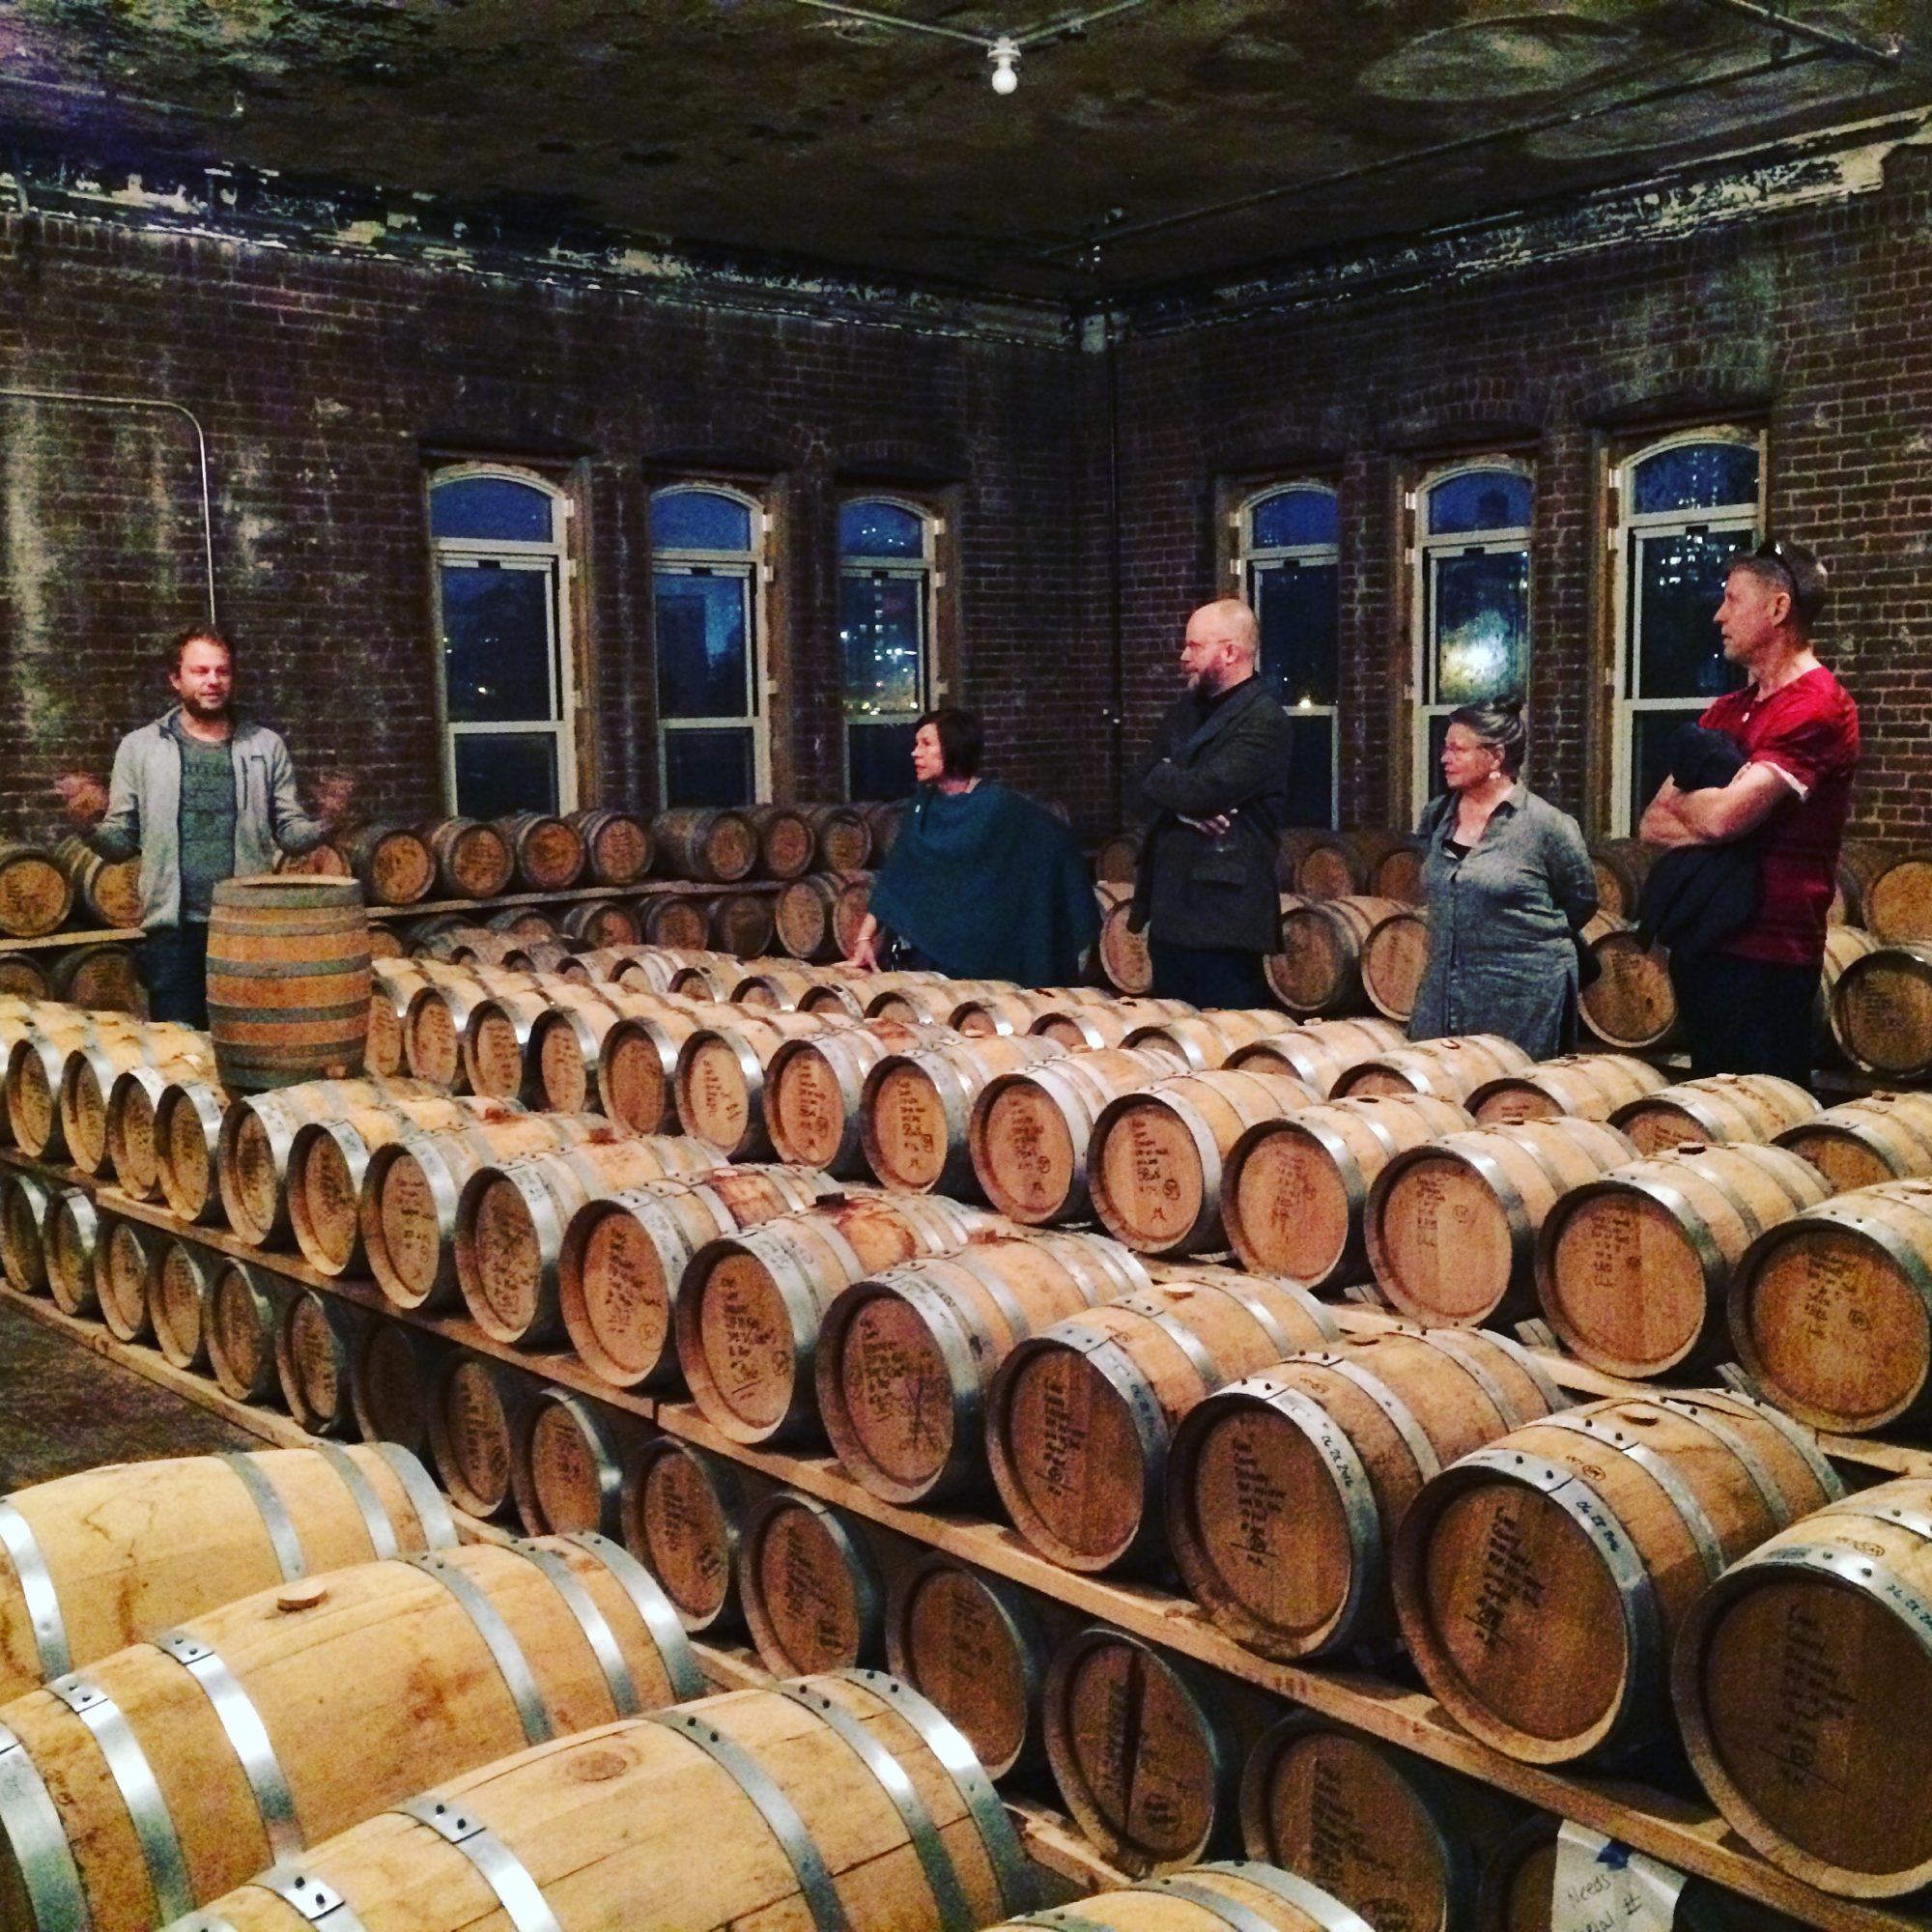 Colin leading a tour in Kings County Distillery barrel room